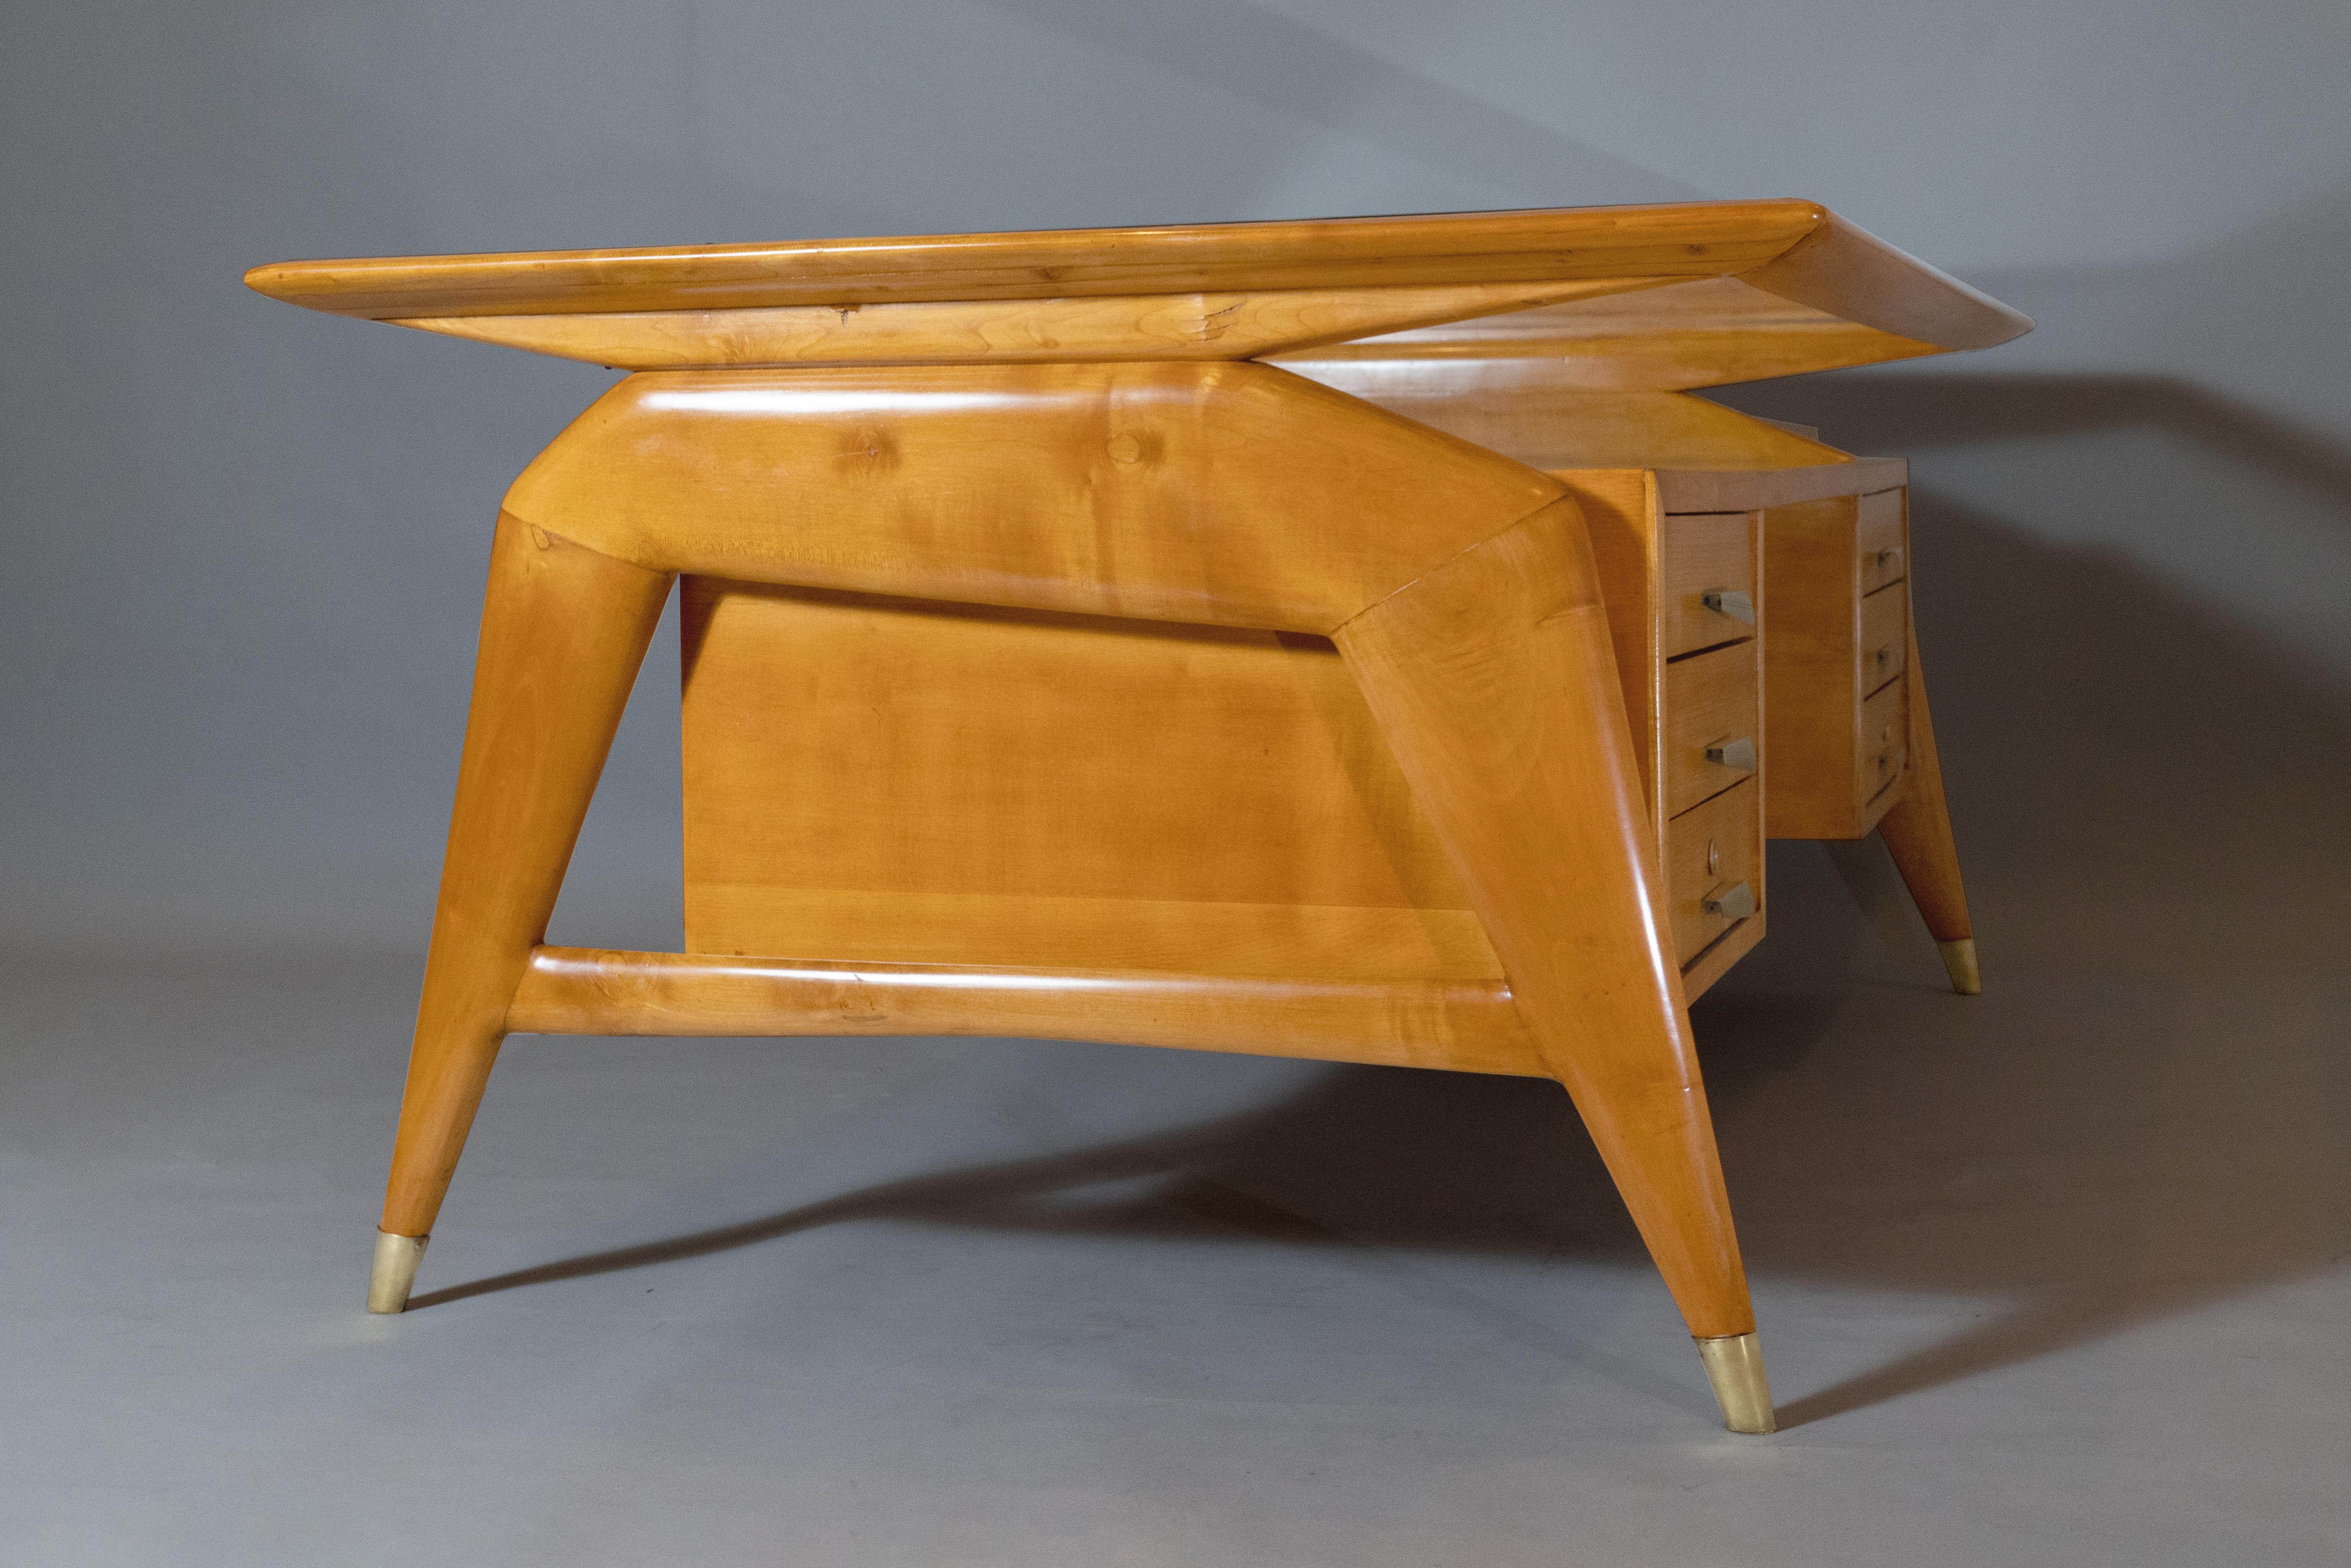 Carlo di Carli: Desk in Fruitwood, Brass, and Glass, Italy 1950s For Sale 2